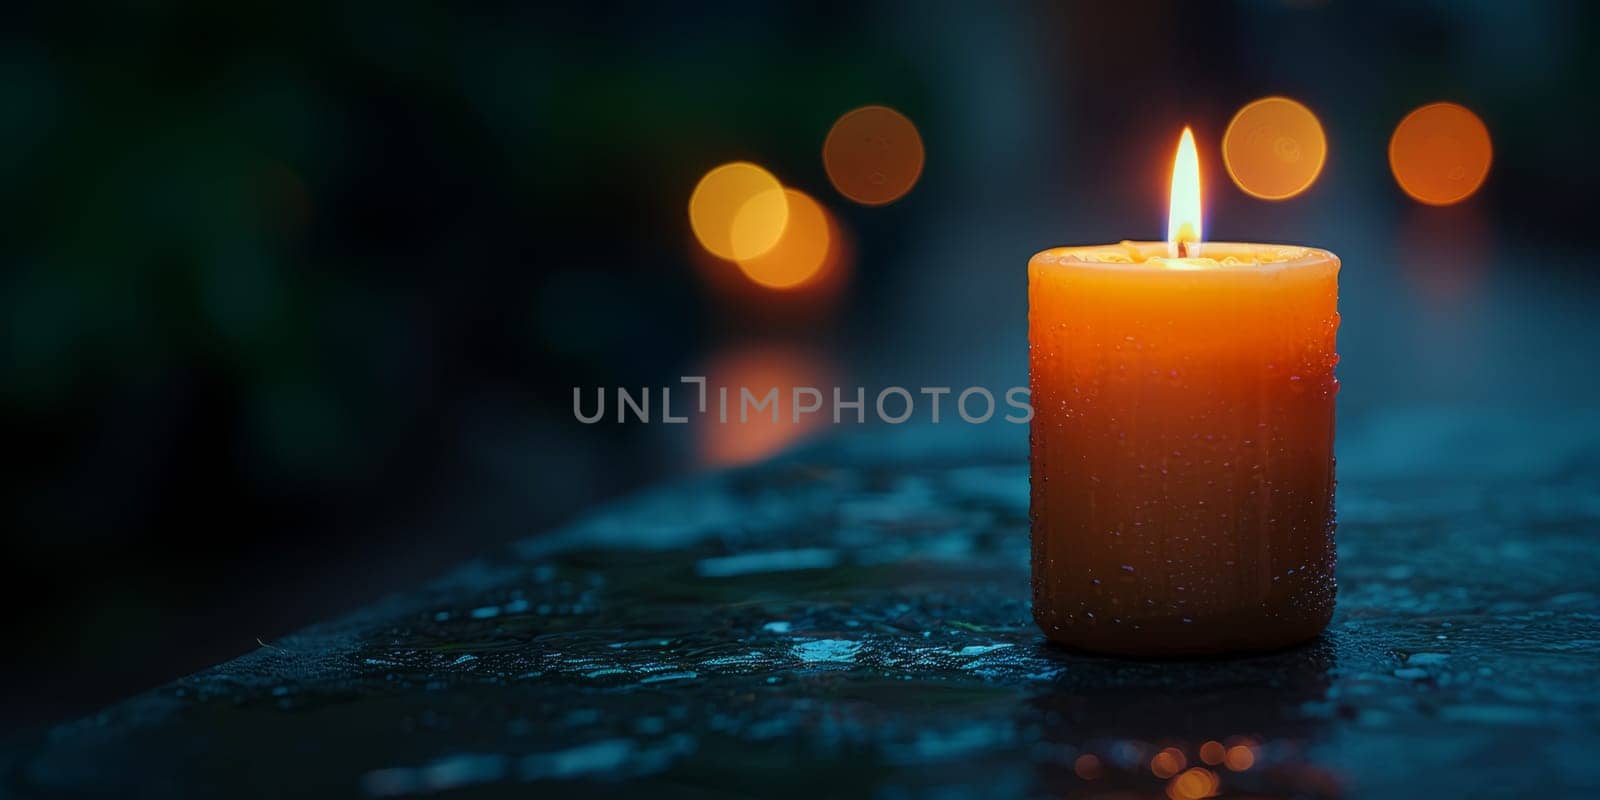 Warm light of Candle in Darkness. Candlelight at night by iliris